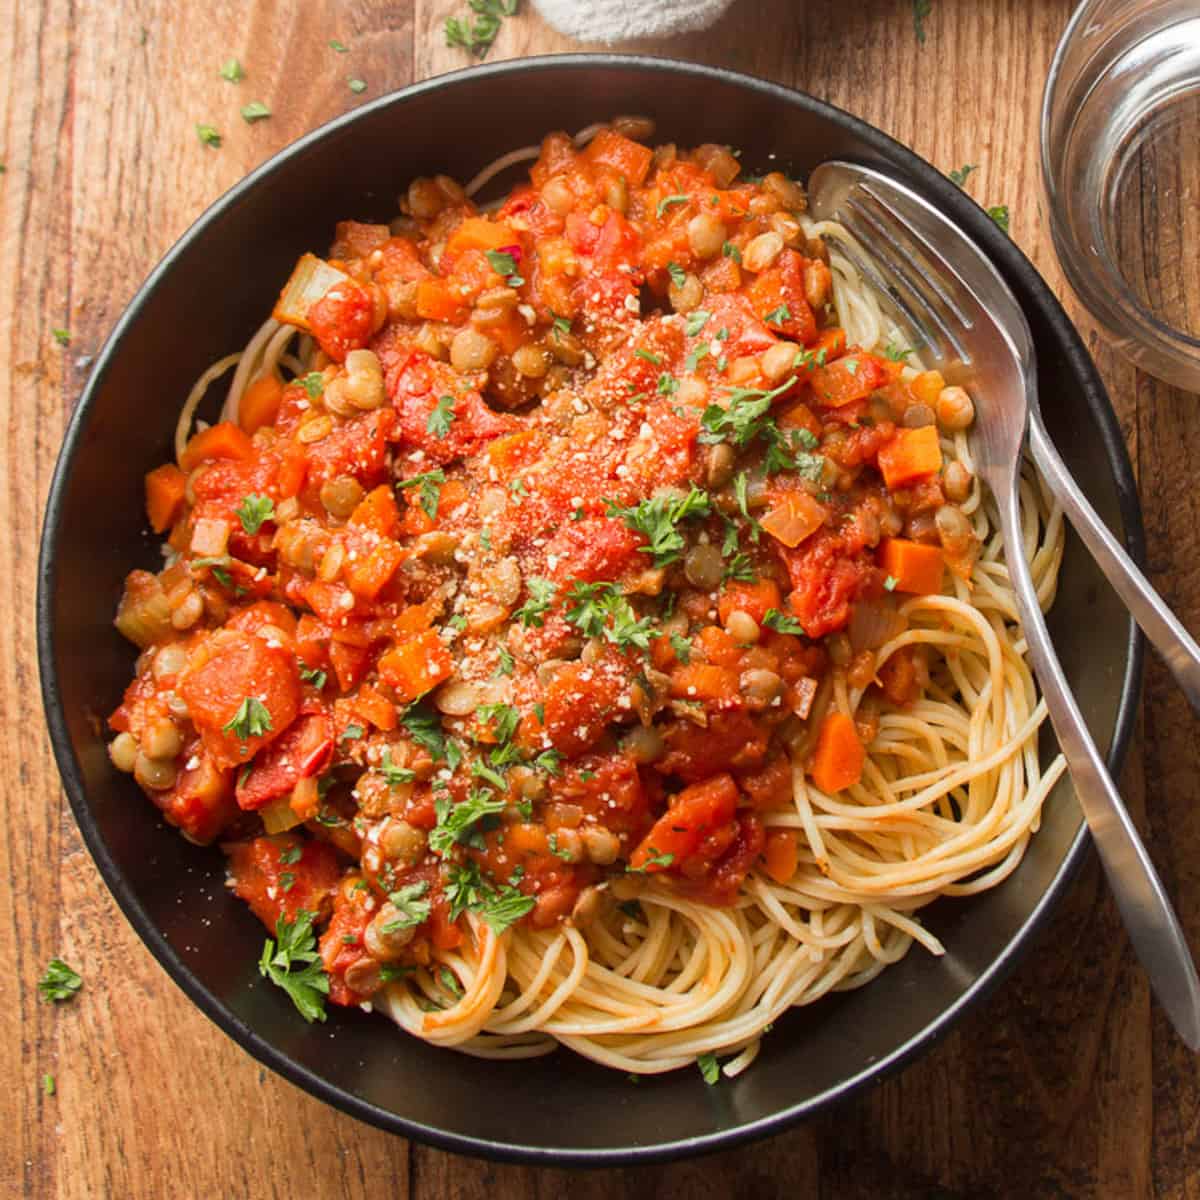 Plate of spaghetti topped with Lentil Bolognese and vegan parmesan cheese.